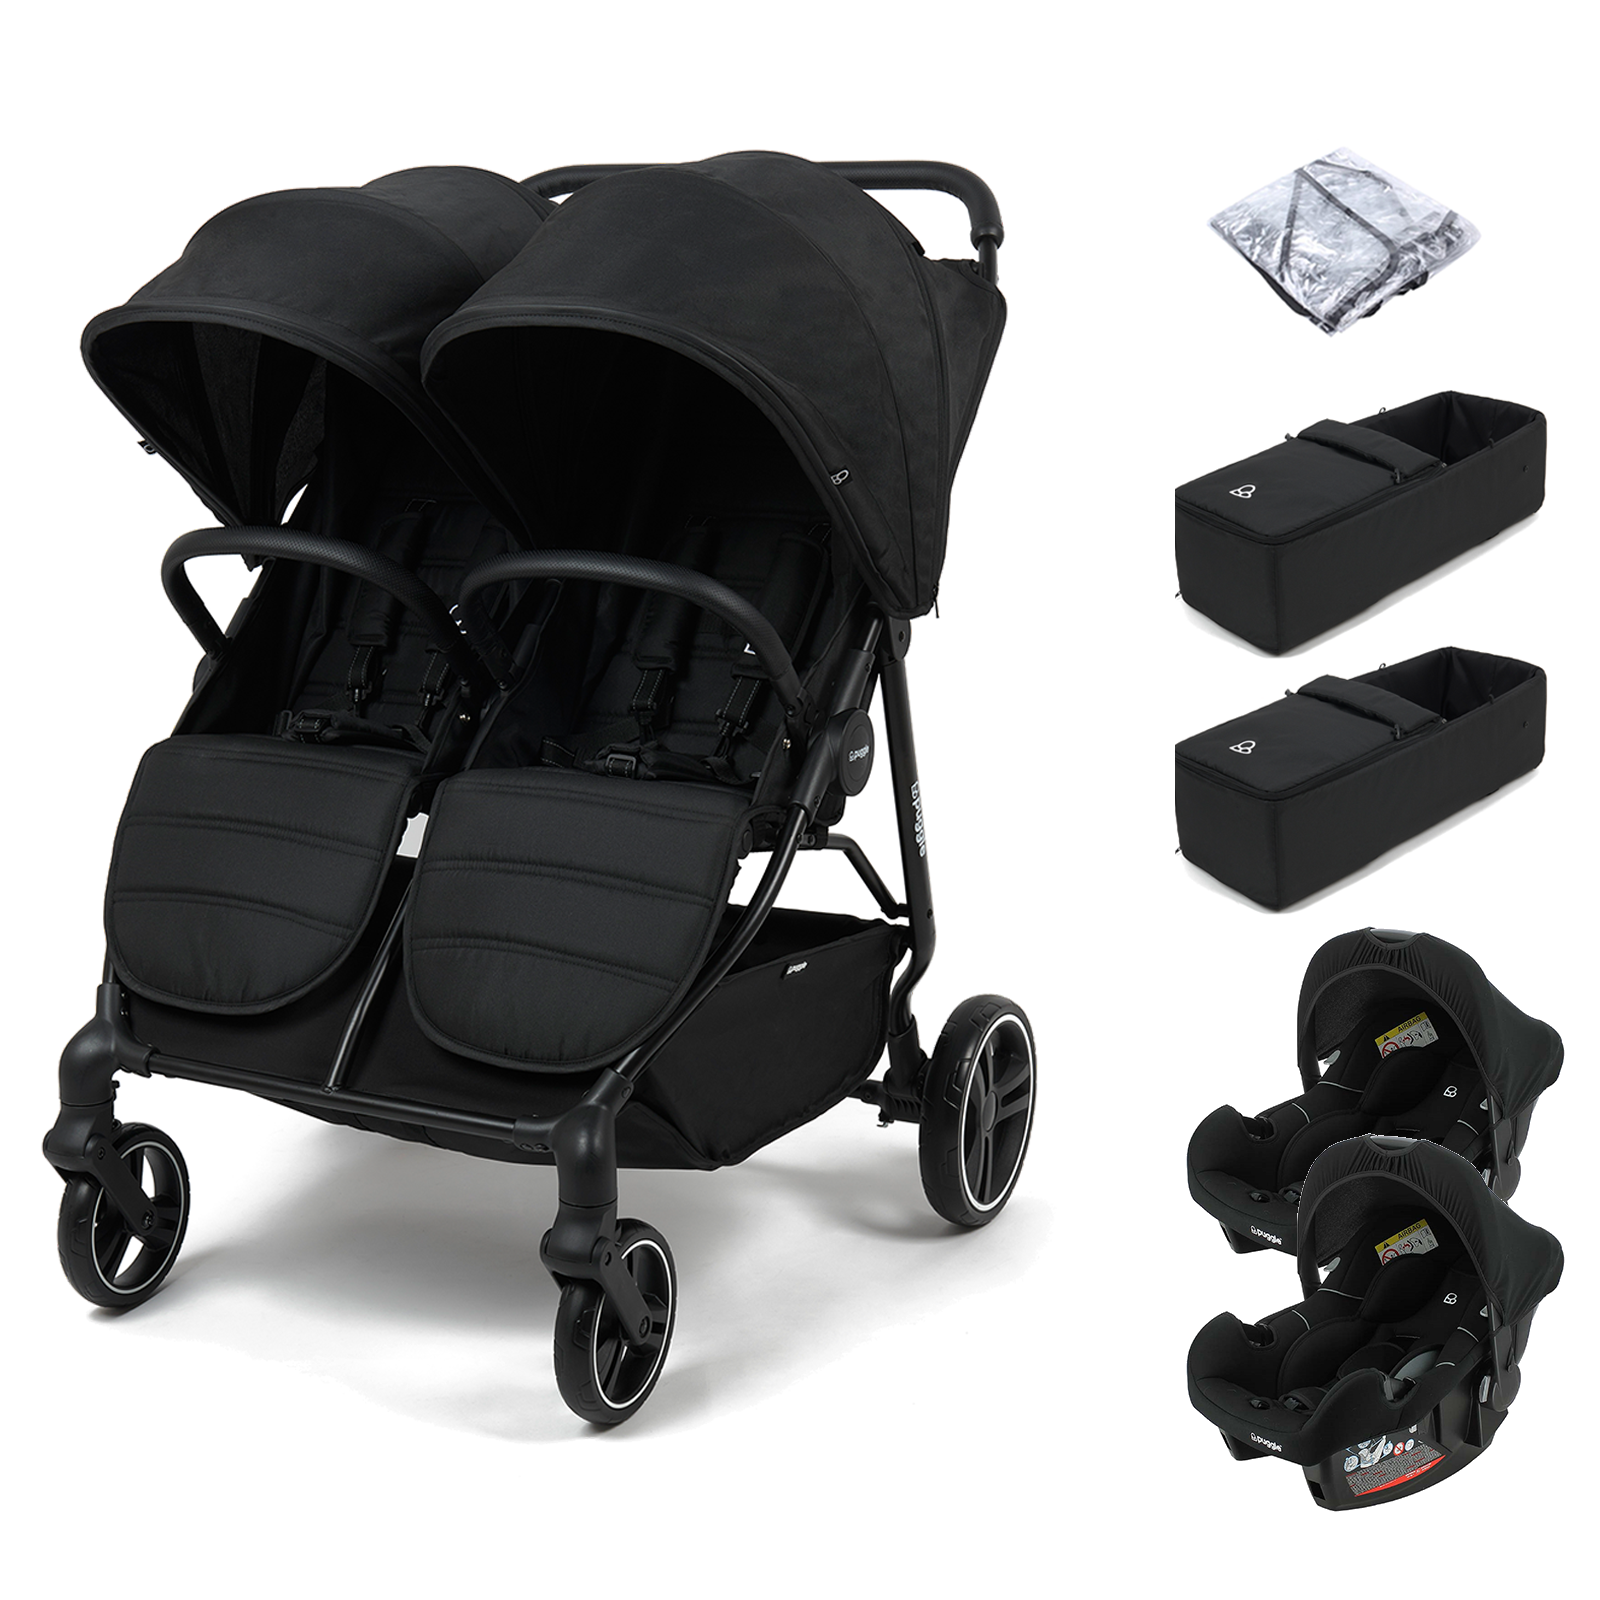 Puggle Urban City Easyfold Twin (Alston Car Seat) Travel System Bundle with +2 Soft Carrycot - Storm Black